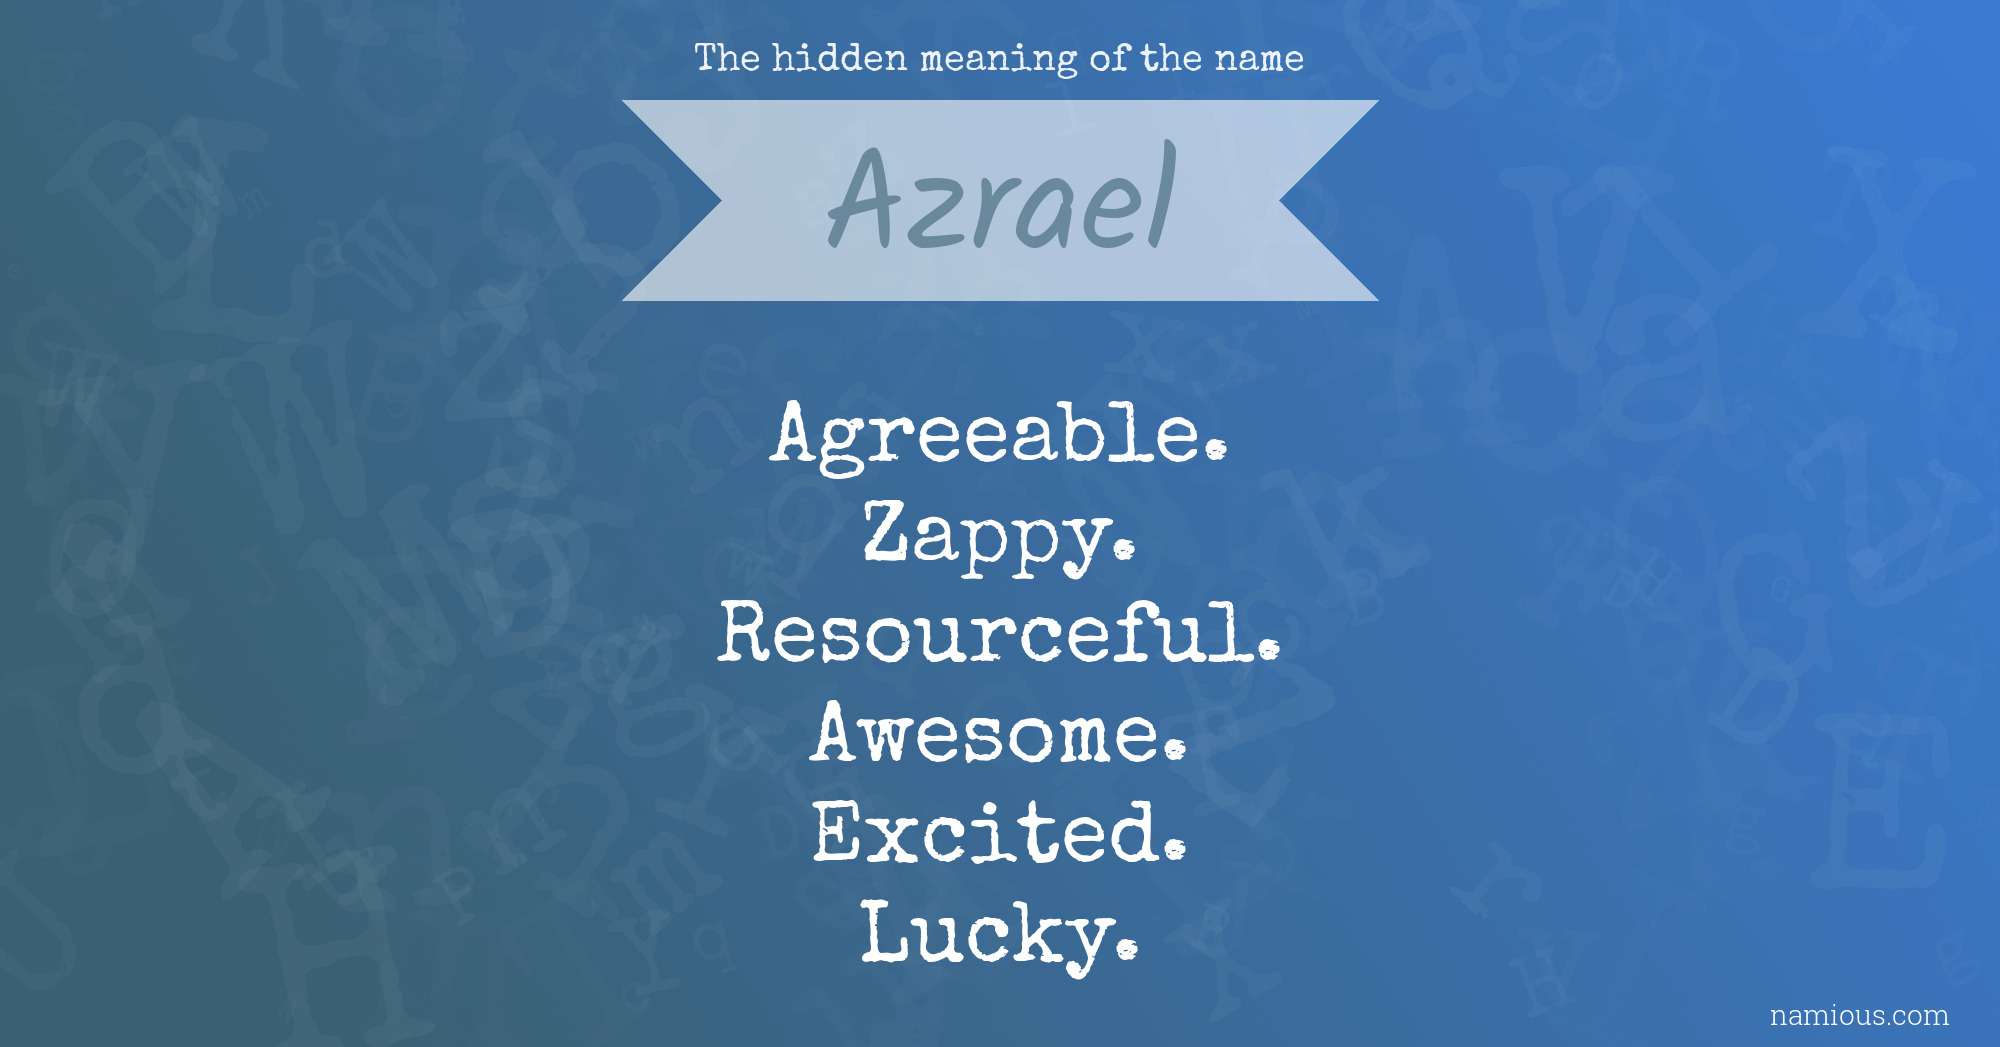 The hidden meaning of the name Azrael